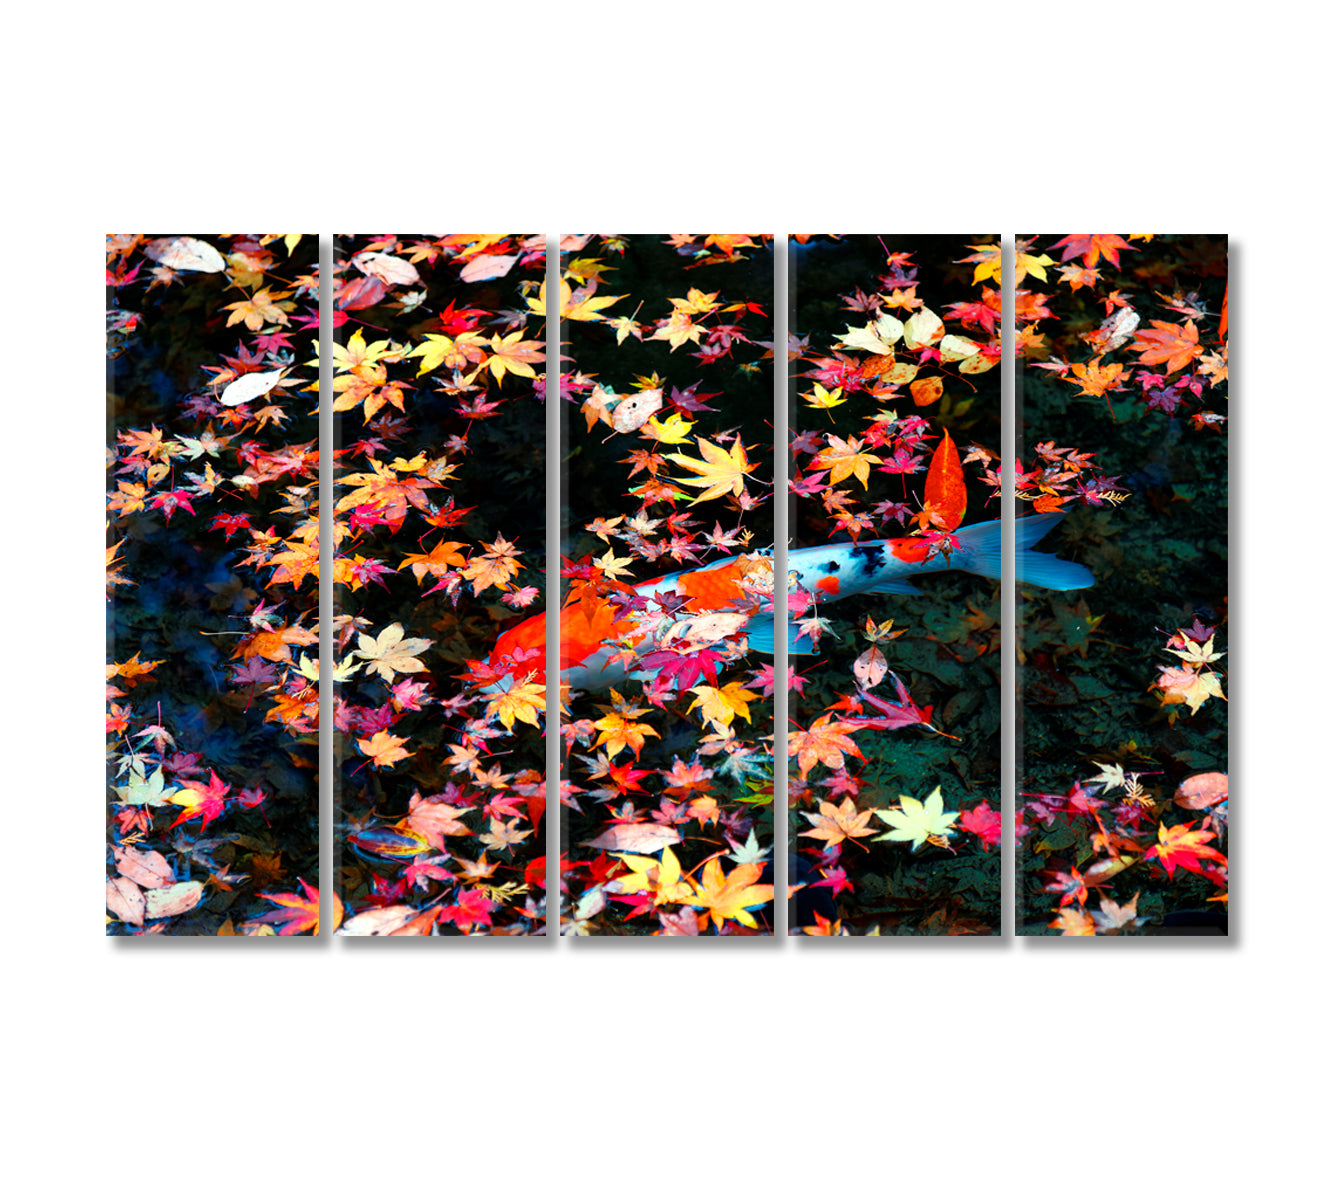 Koi Fish Fancy Carp in Pond with Maple Leaves Canvas Print-Canvas Print-CetArt-5 Panels-36x24 inches-CetArt